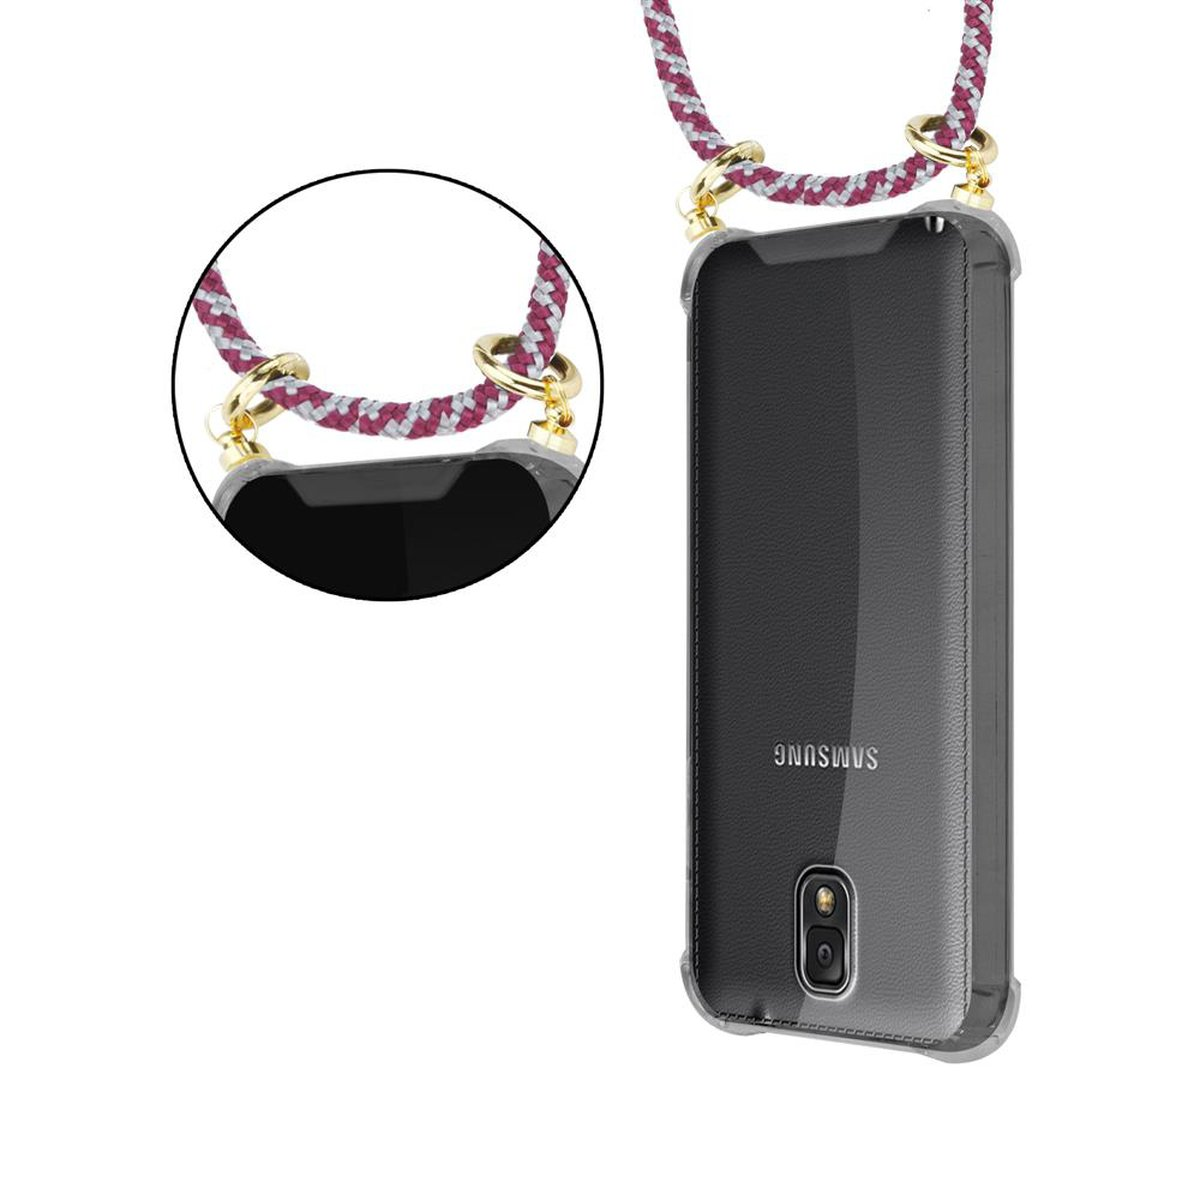 ROT Samsung, Band Handy WEIß abnehmbarer Kette Kordel Backcover, 3, Galaxy mit und NOTE CADORABO Hülle, Ringen, Gold